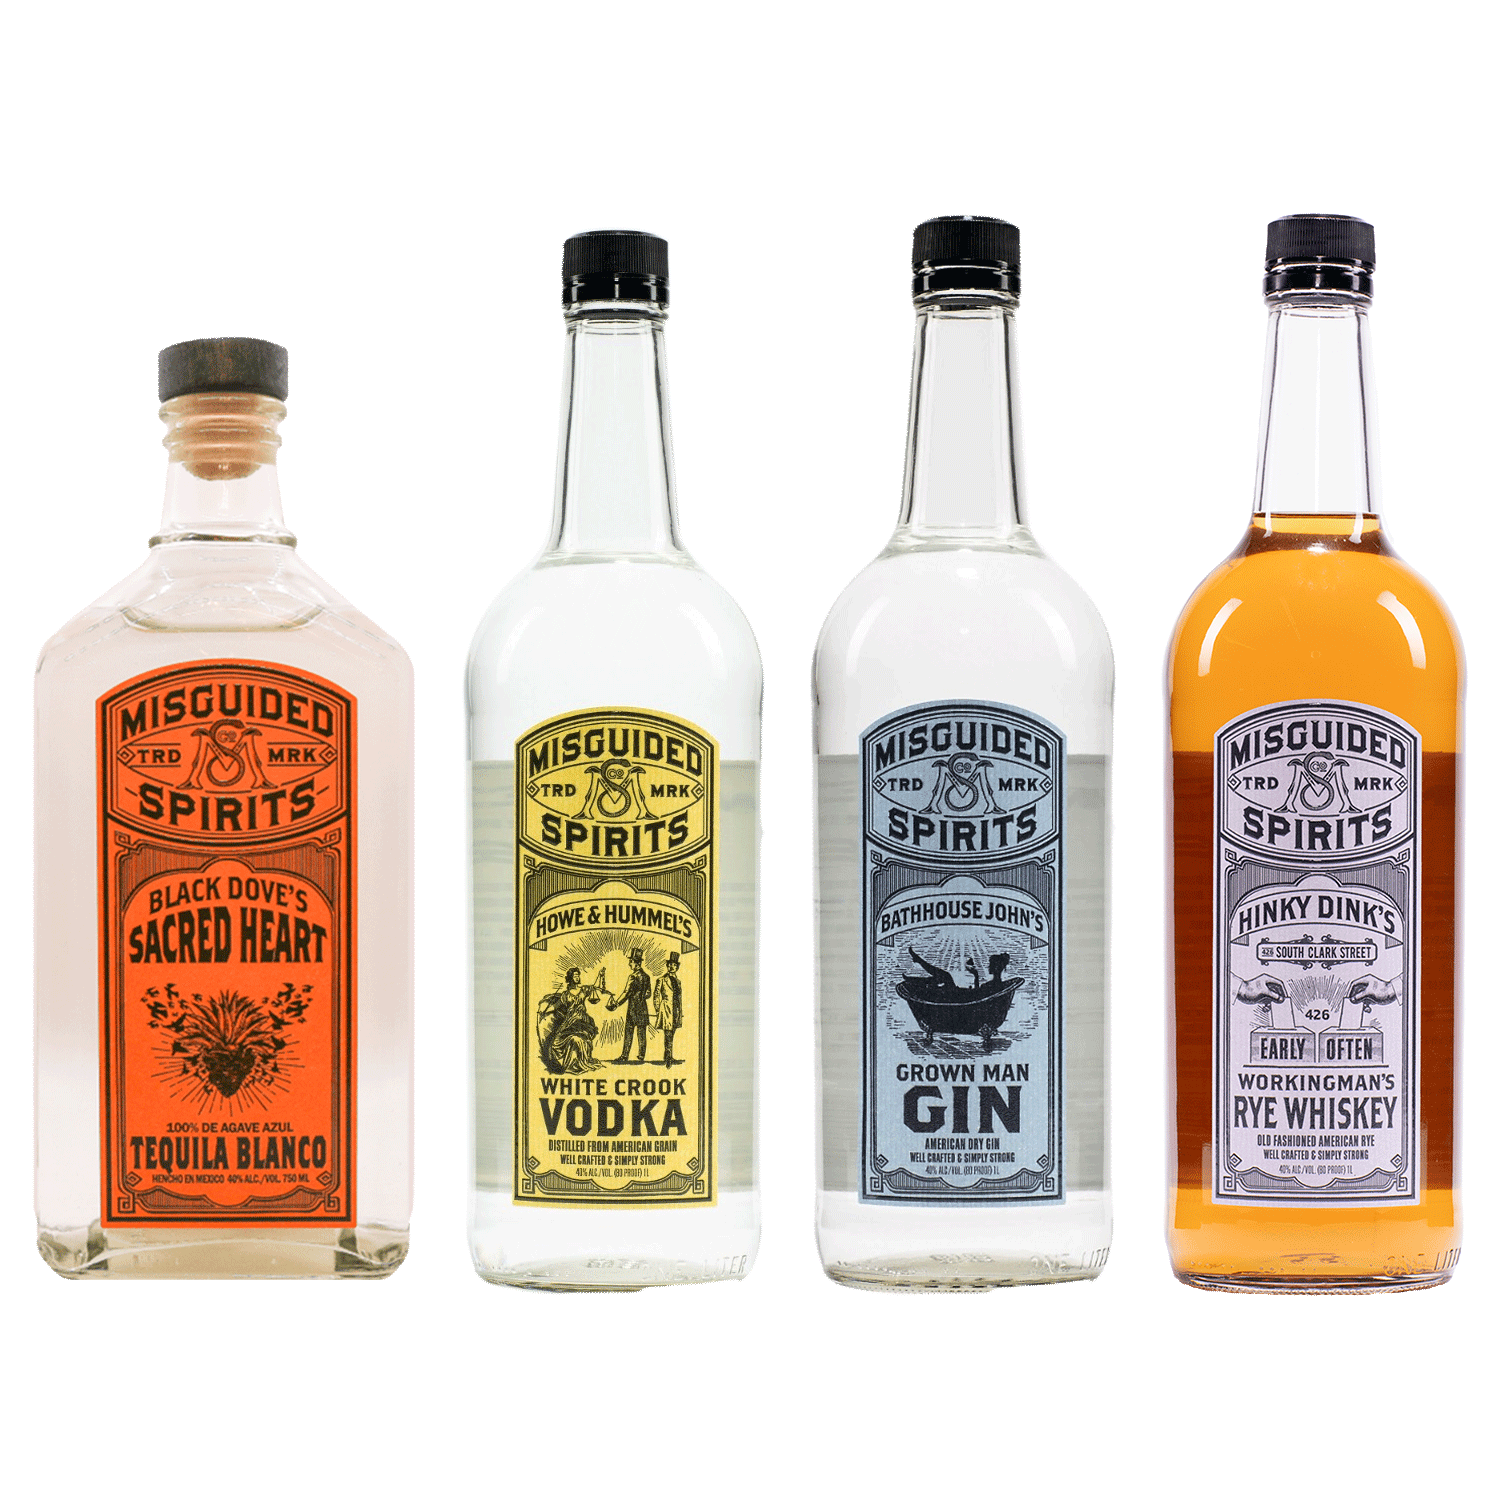 Misguided Spirits one bottle 1L each 1L, Gin 1L, Wine to Happy - Rye Vodka Merchants - Offer! Royal